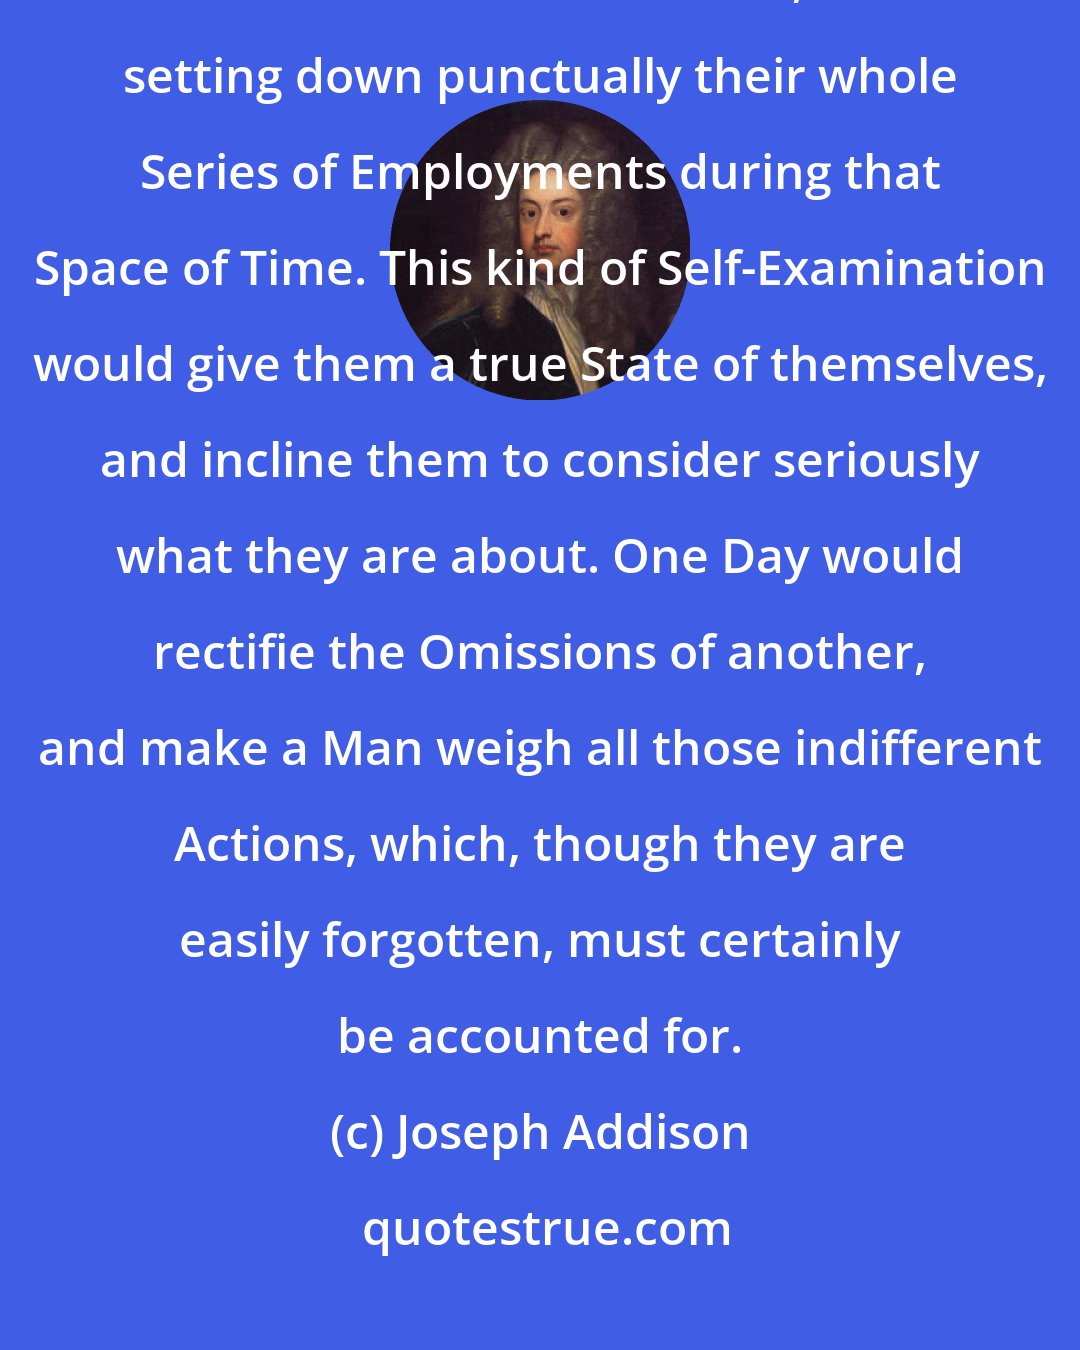 Joseph Addison: I... recommend to every one of my Readers, the keeping a Journal of their Lives for one Week, and setting down punctually their whole Series of Employments during that Space of Time. This kind of Self-Examination would give them a true State of themselves, and incline them to consider seriously what they are about. One Day would rectifie the Omissions of another, and make a Man weigh all those indifferent Actions, which, though they are easily forgotten, must certainly be accounted for.